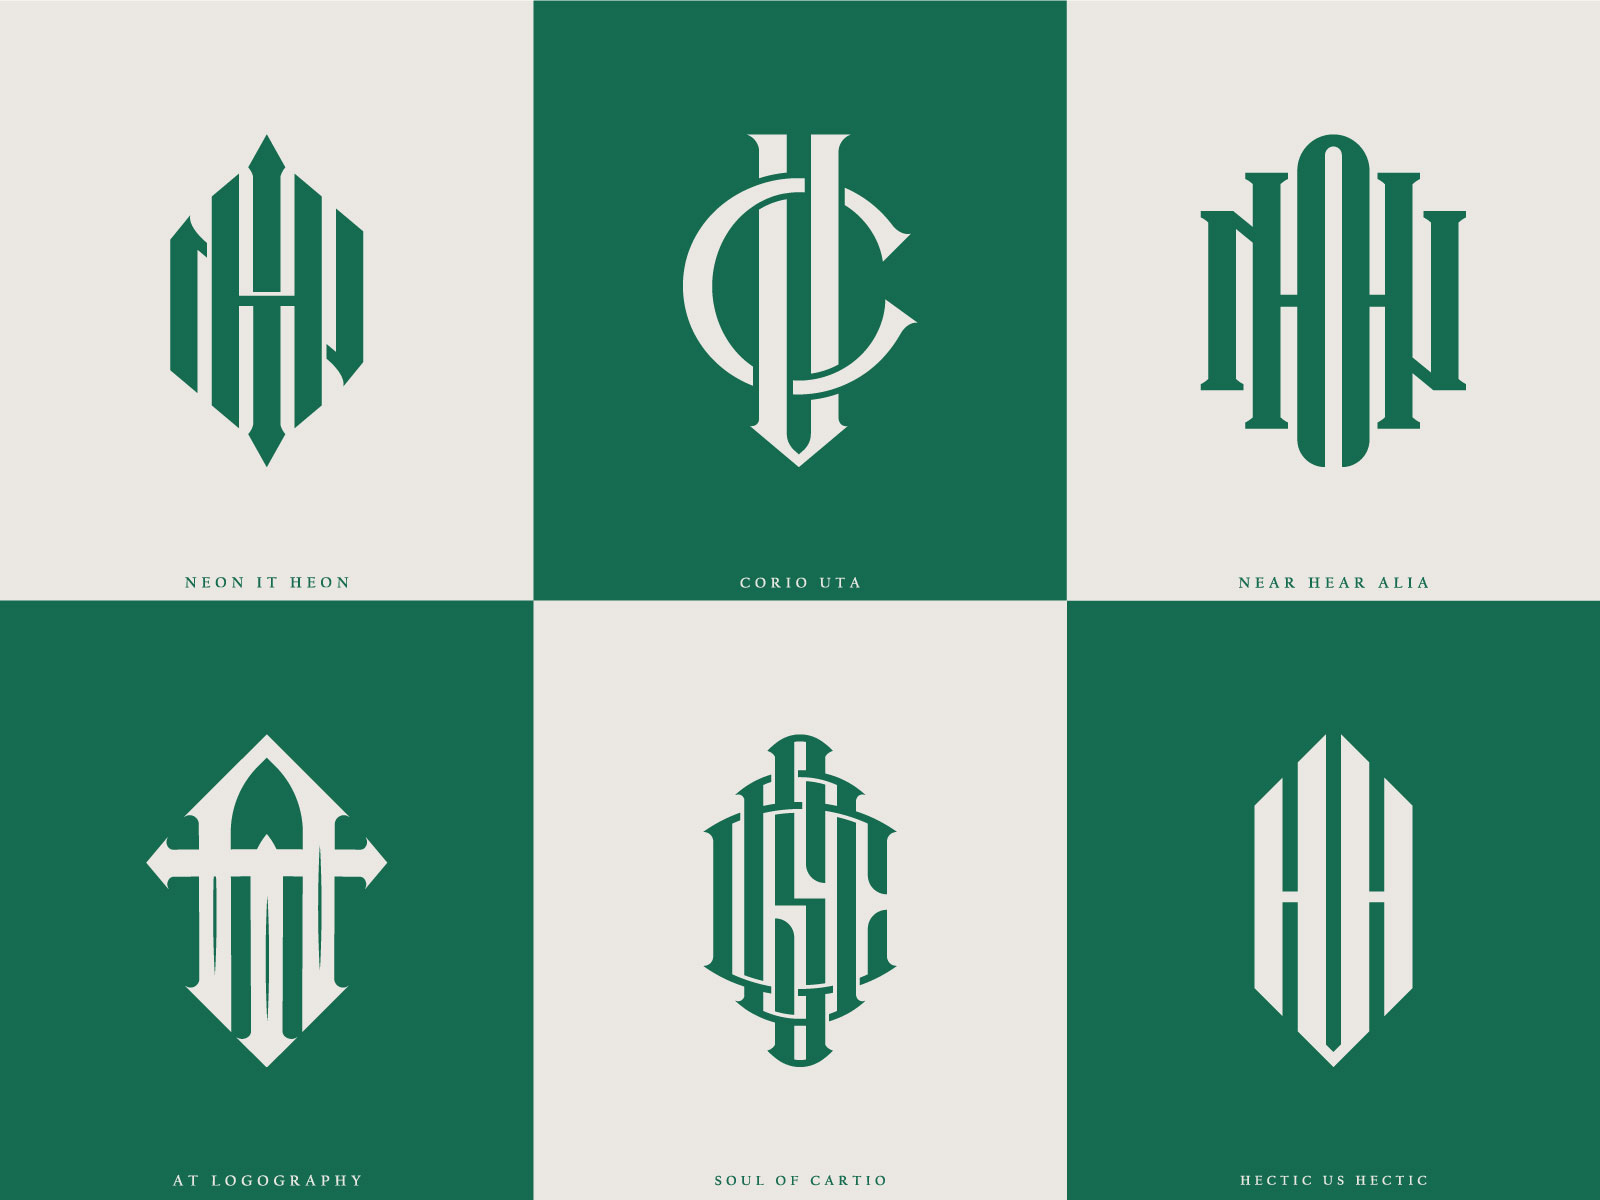 Logos For Clothing Brands by Md. Asif Zaman on Dribbble